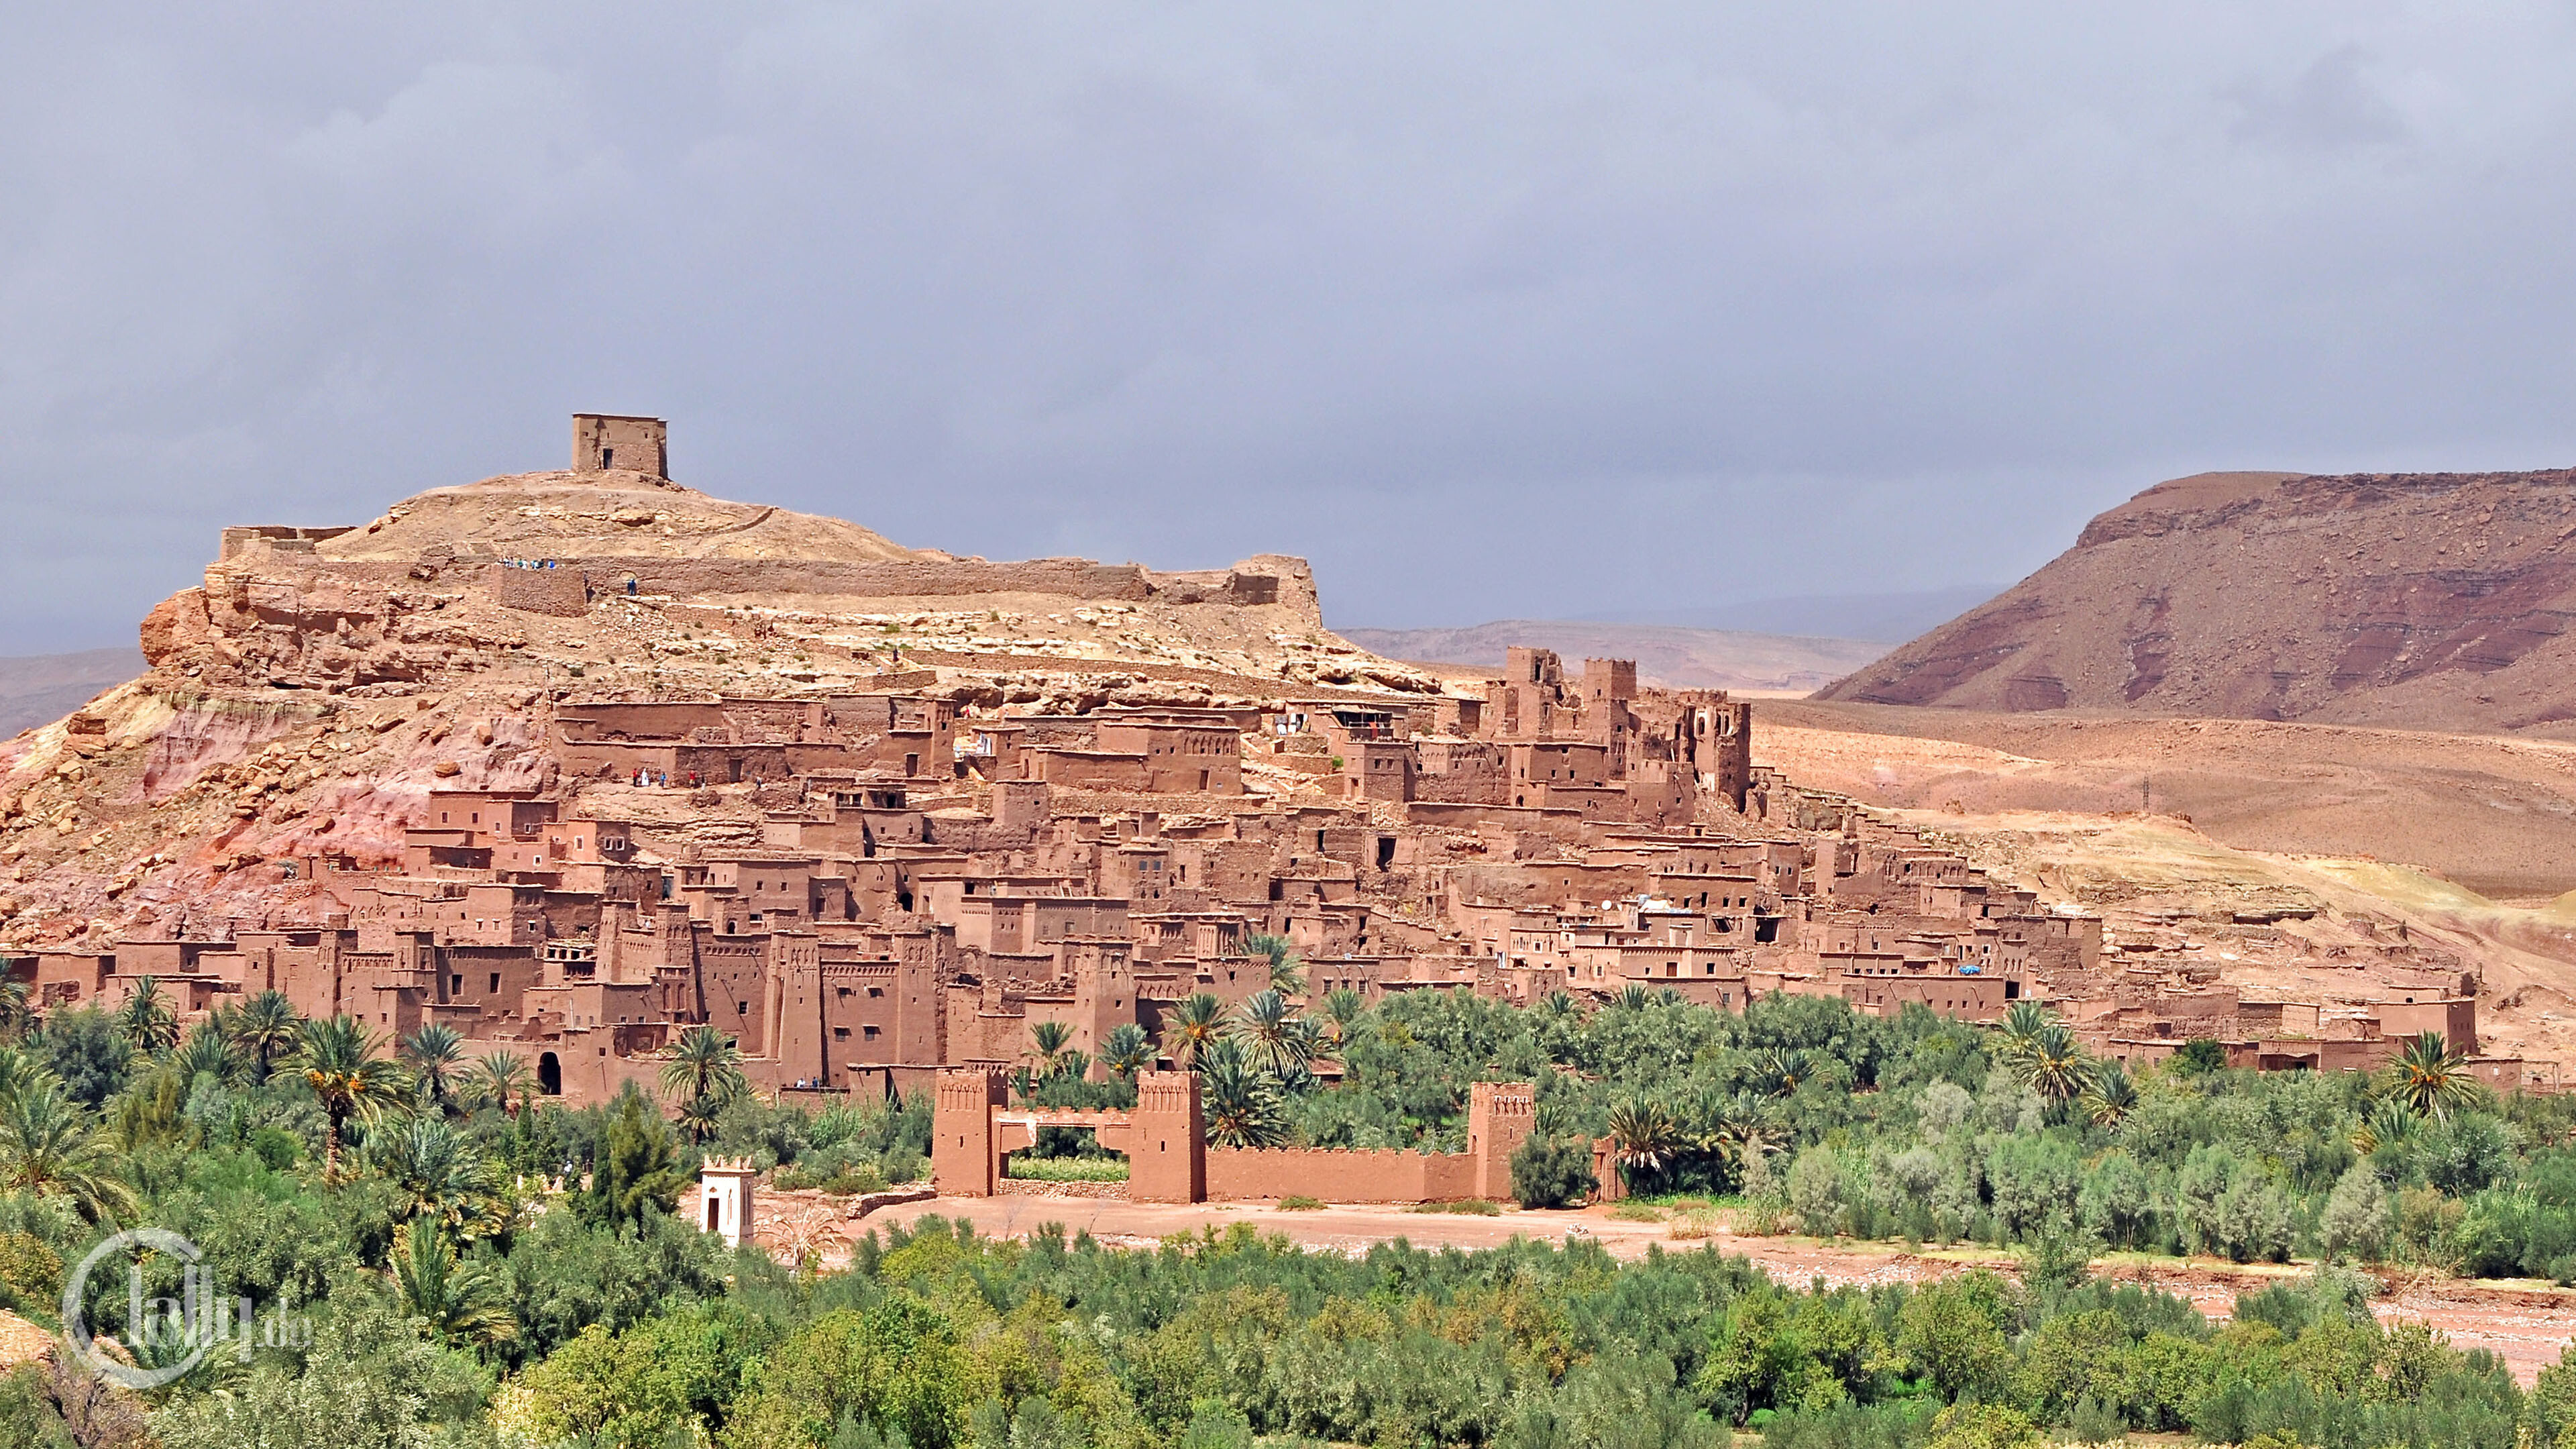 Morocco: Palace Ait Ben Haddou, A country in the Maghreb region of North Africa. 3840x2160 4K Wallpaper.